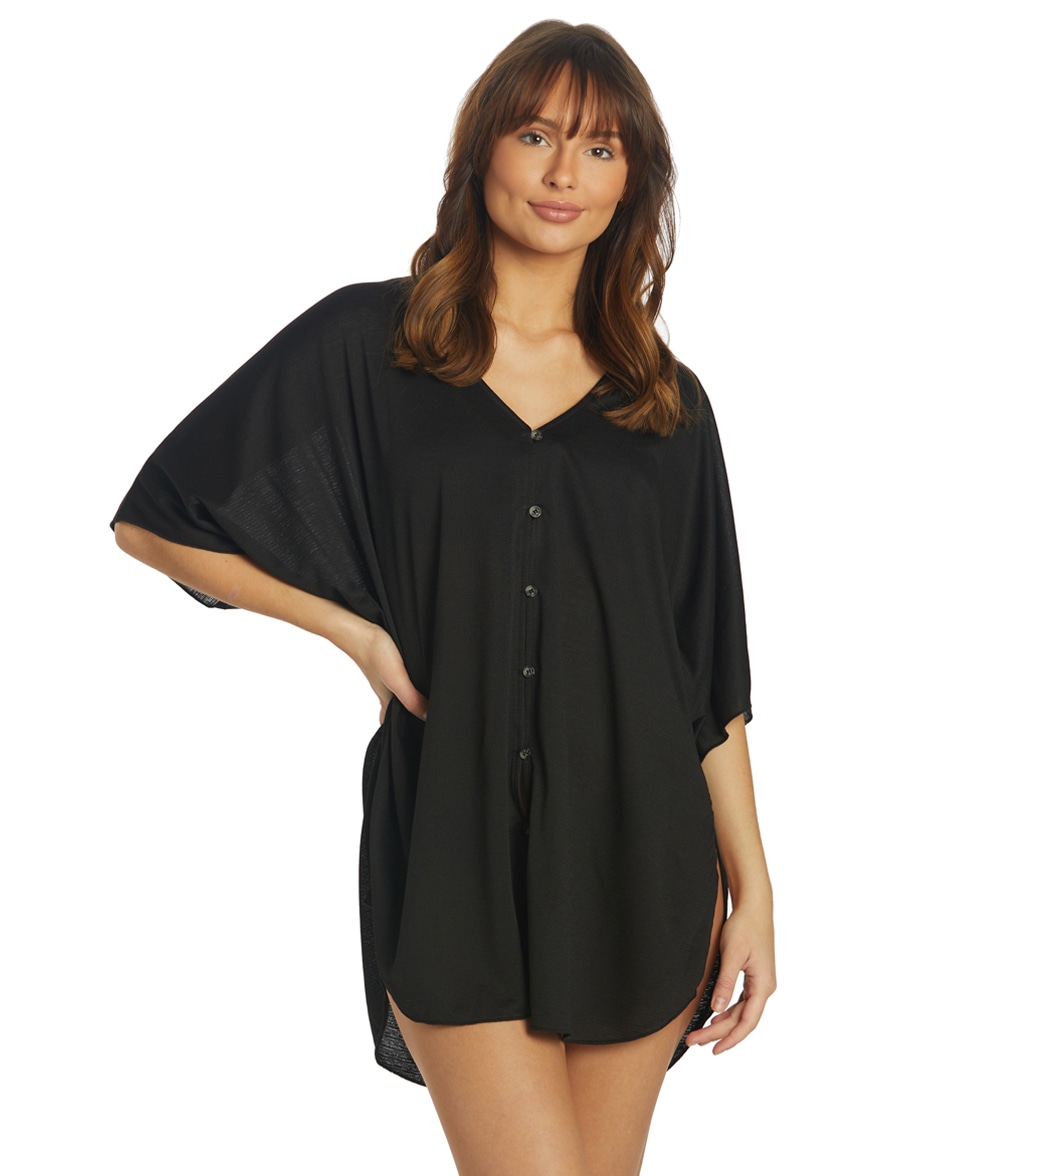 Hurley Women's Solid Button Front Tunic - Black Medium/Large - Swimoutlet.com